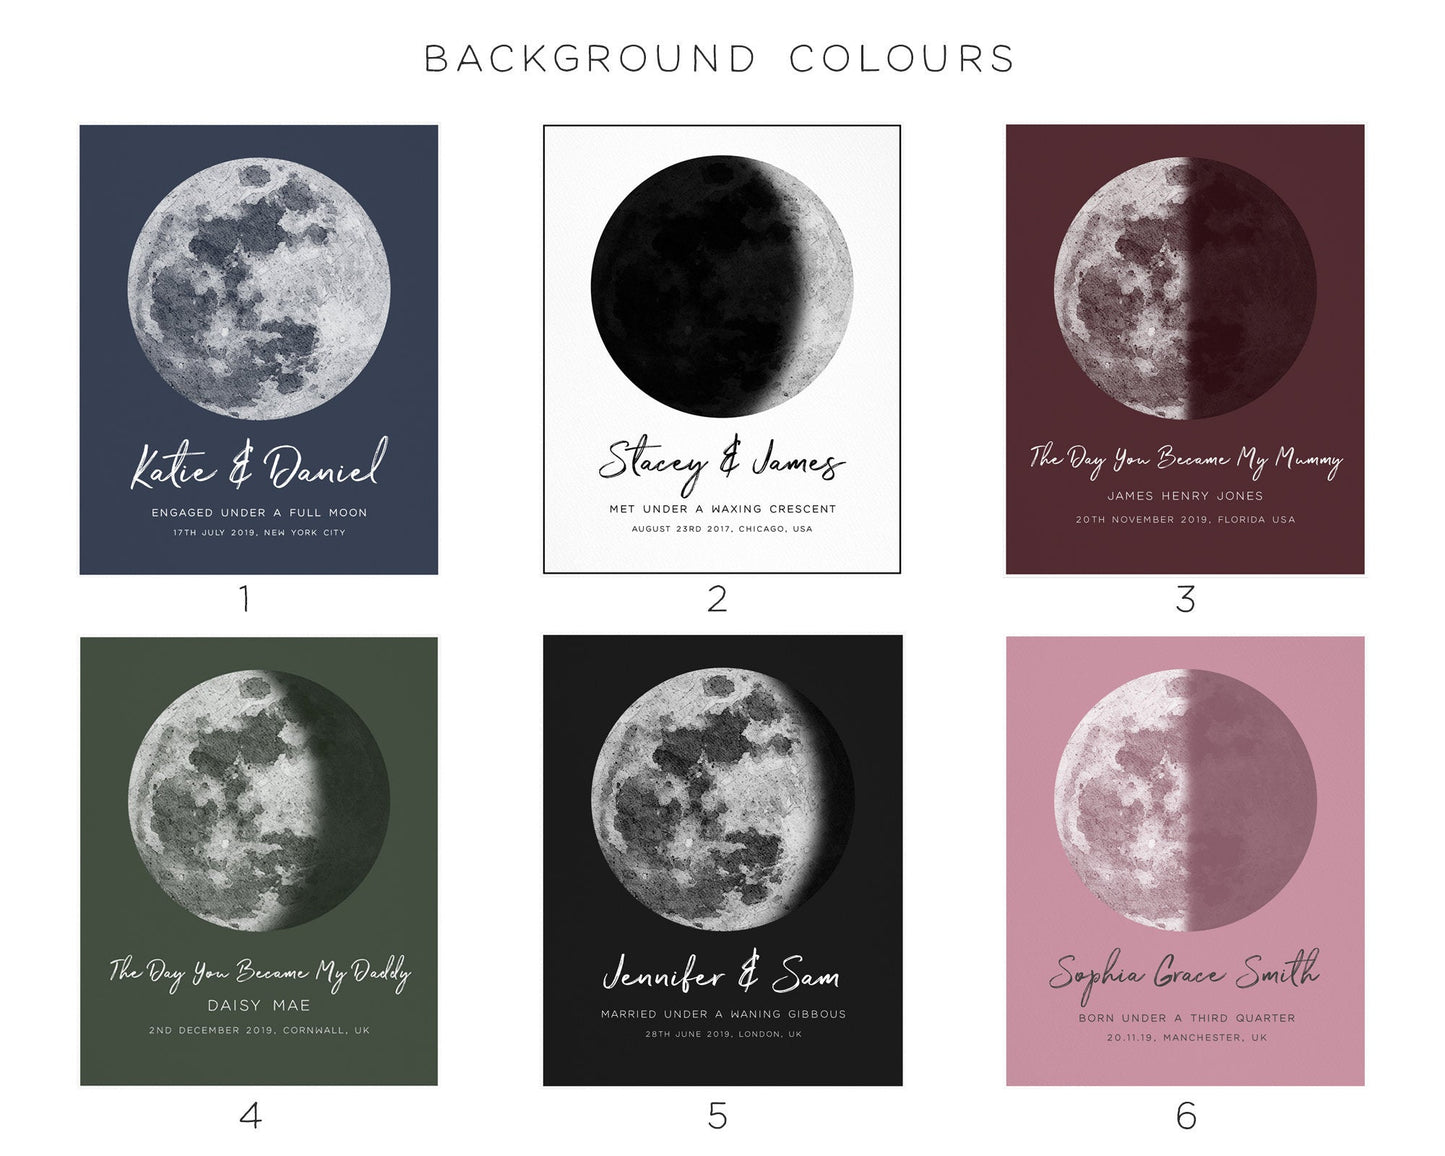 Personalized Moon Phase Poster, Custom by Date and Location